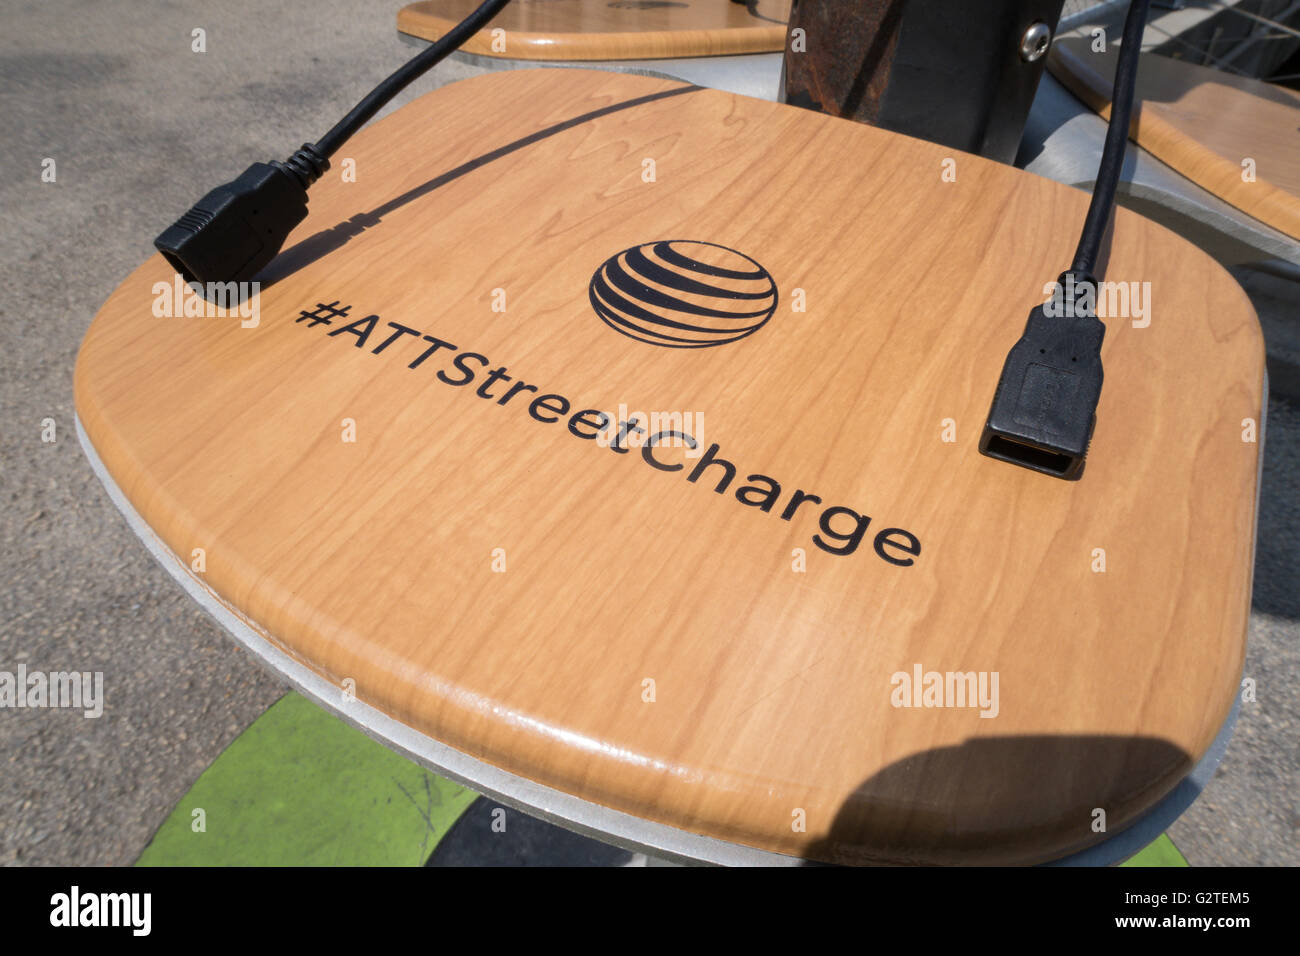 # ATTStreetCharge, Brooklyn, NY Banque D'Images